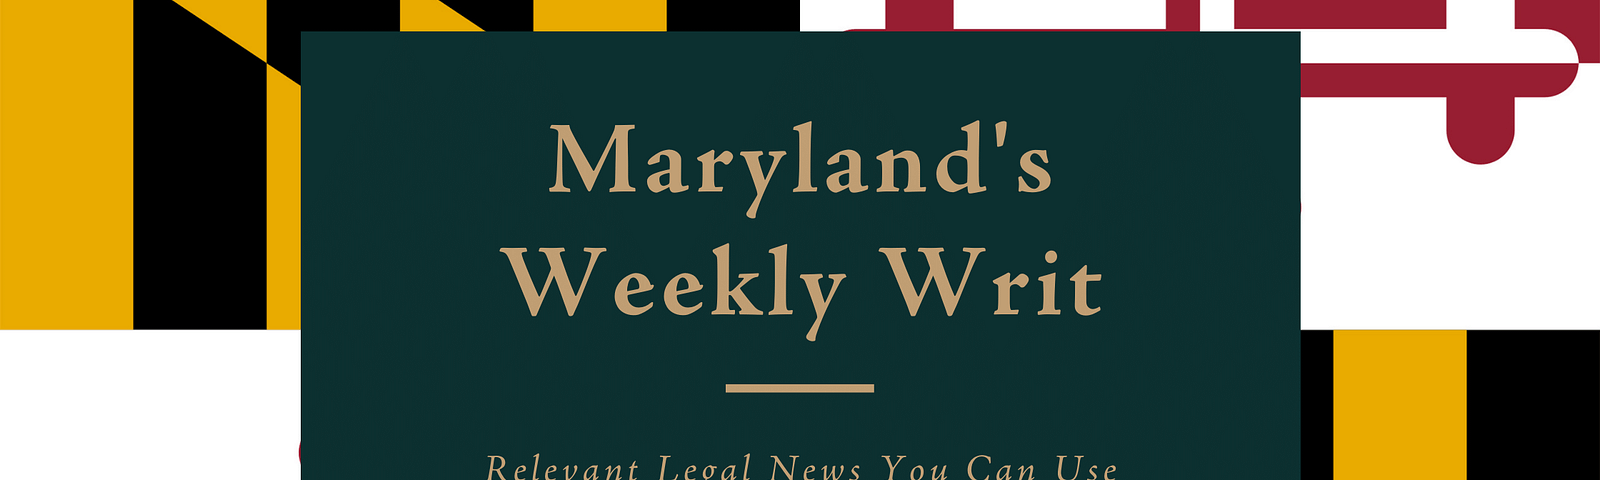 The Weekly Writ: Maryland Legal News You Can Use for July 26, 2021